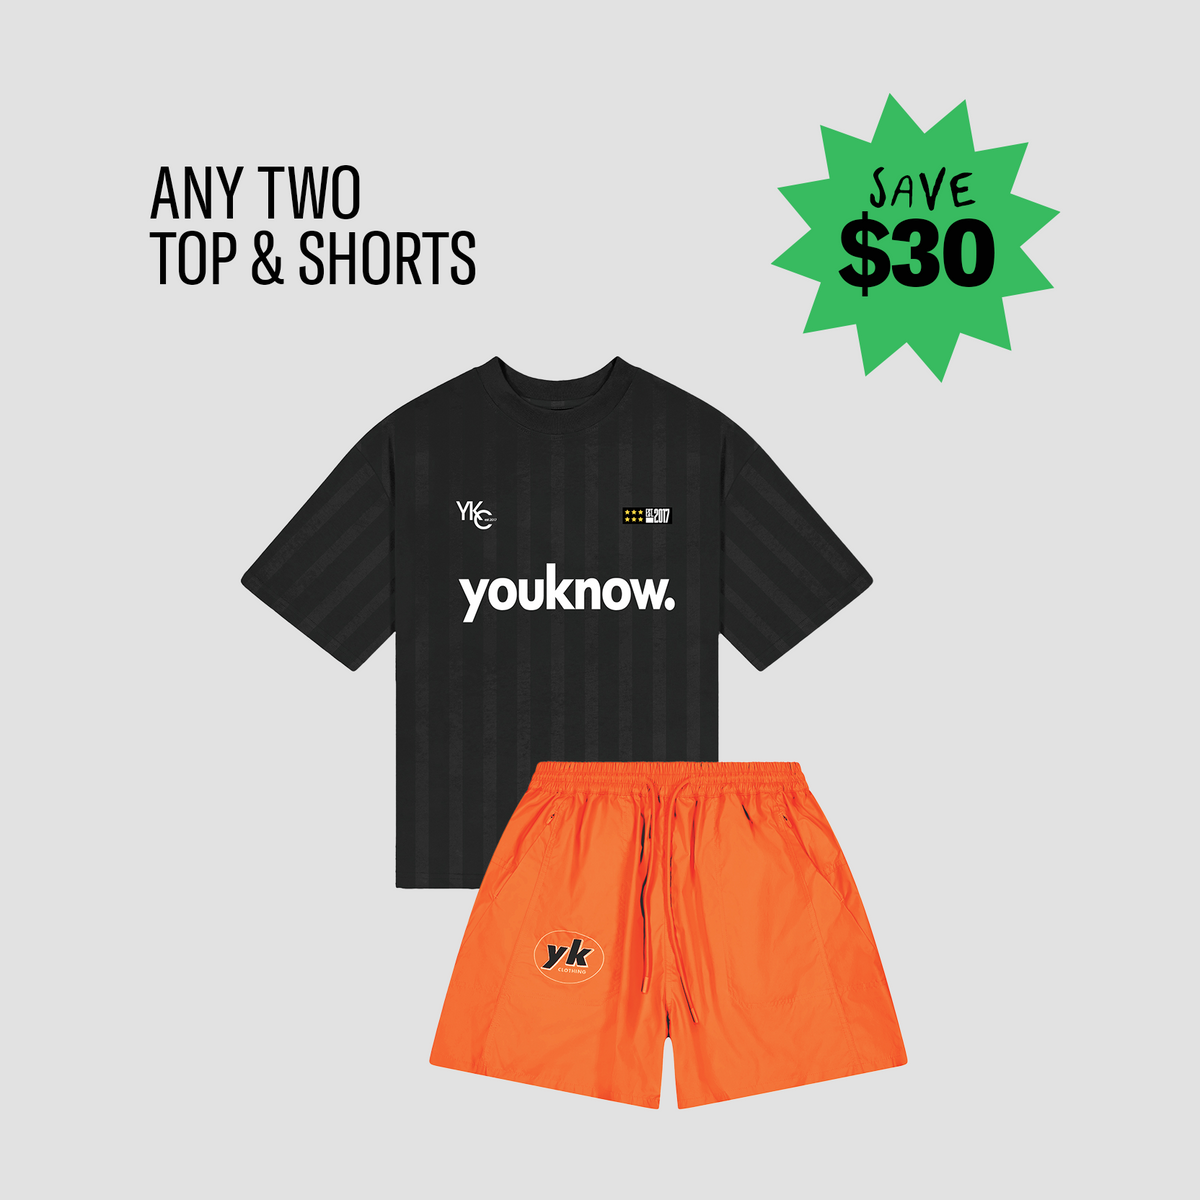 Buy Two Tops or Shorts Save $30